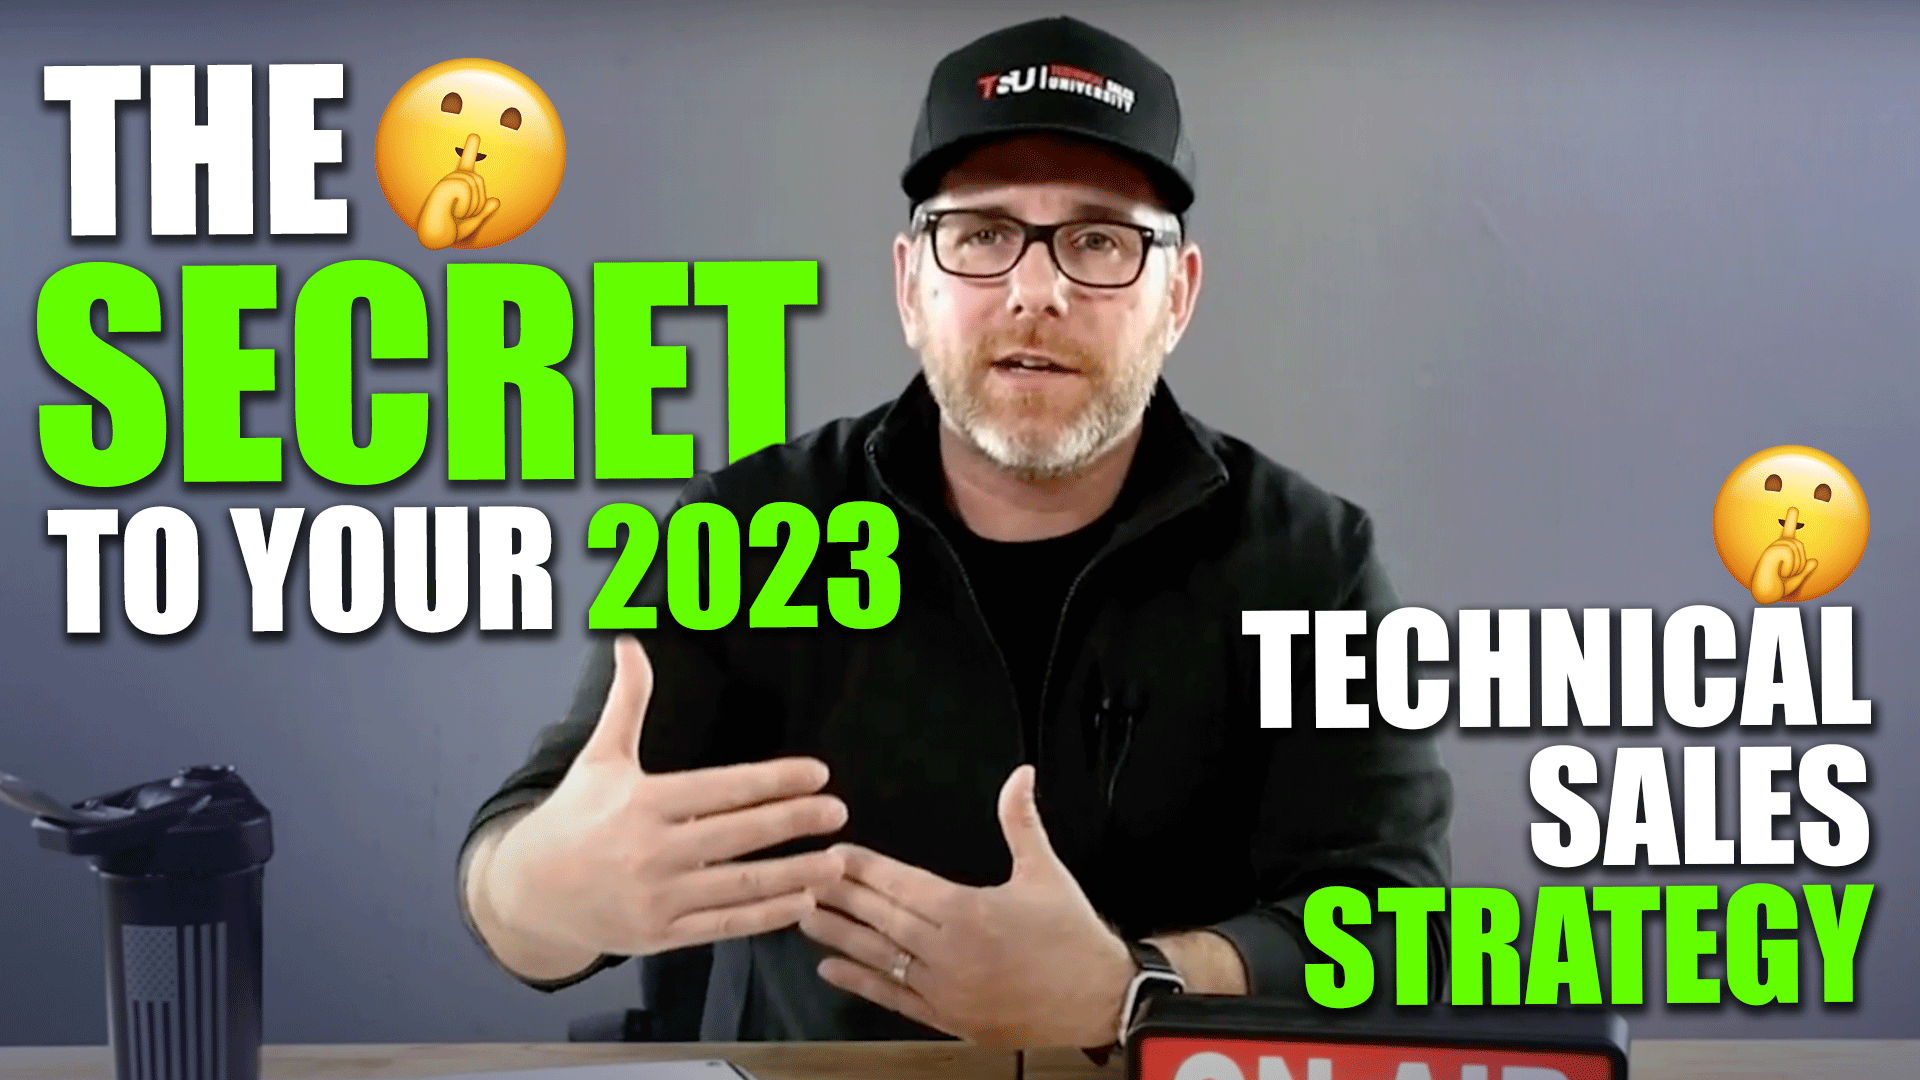 Kyle Milan talks about technical sales strategy for 2023.